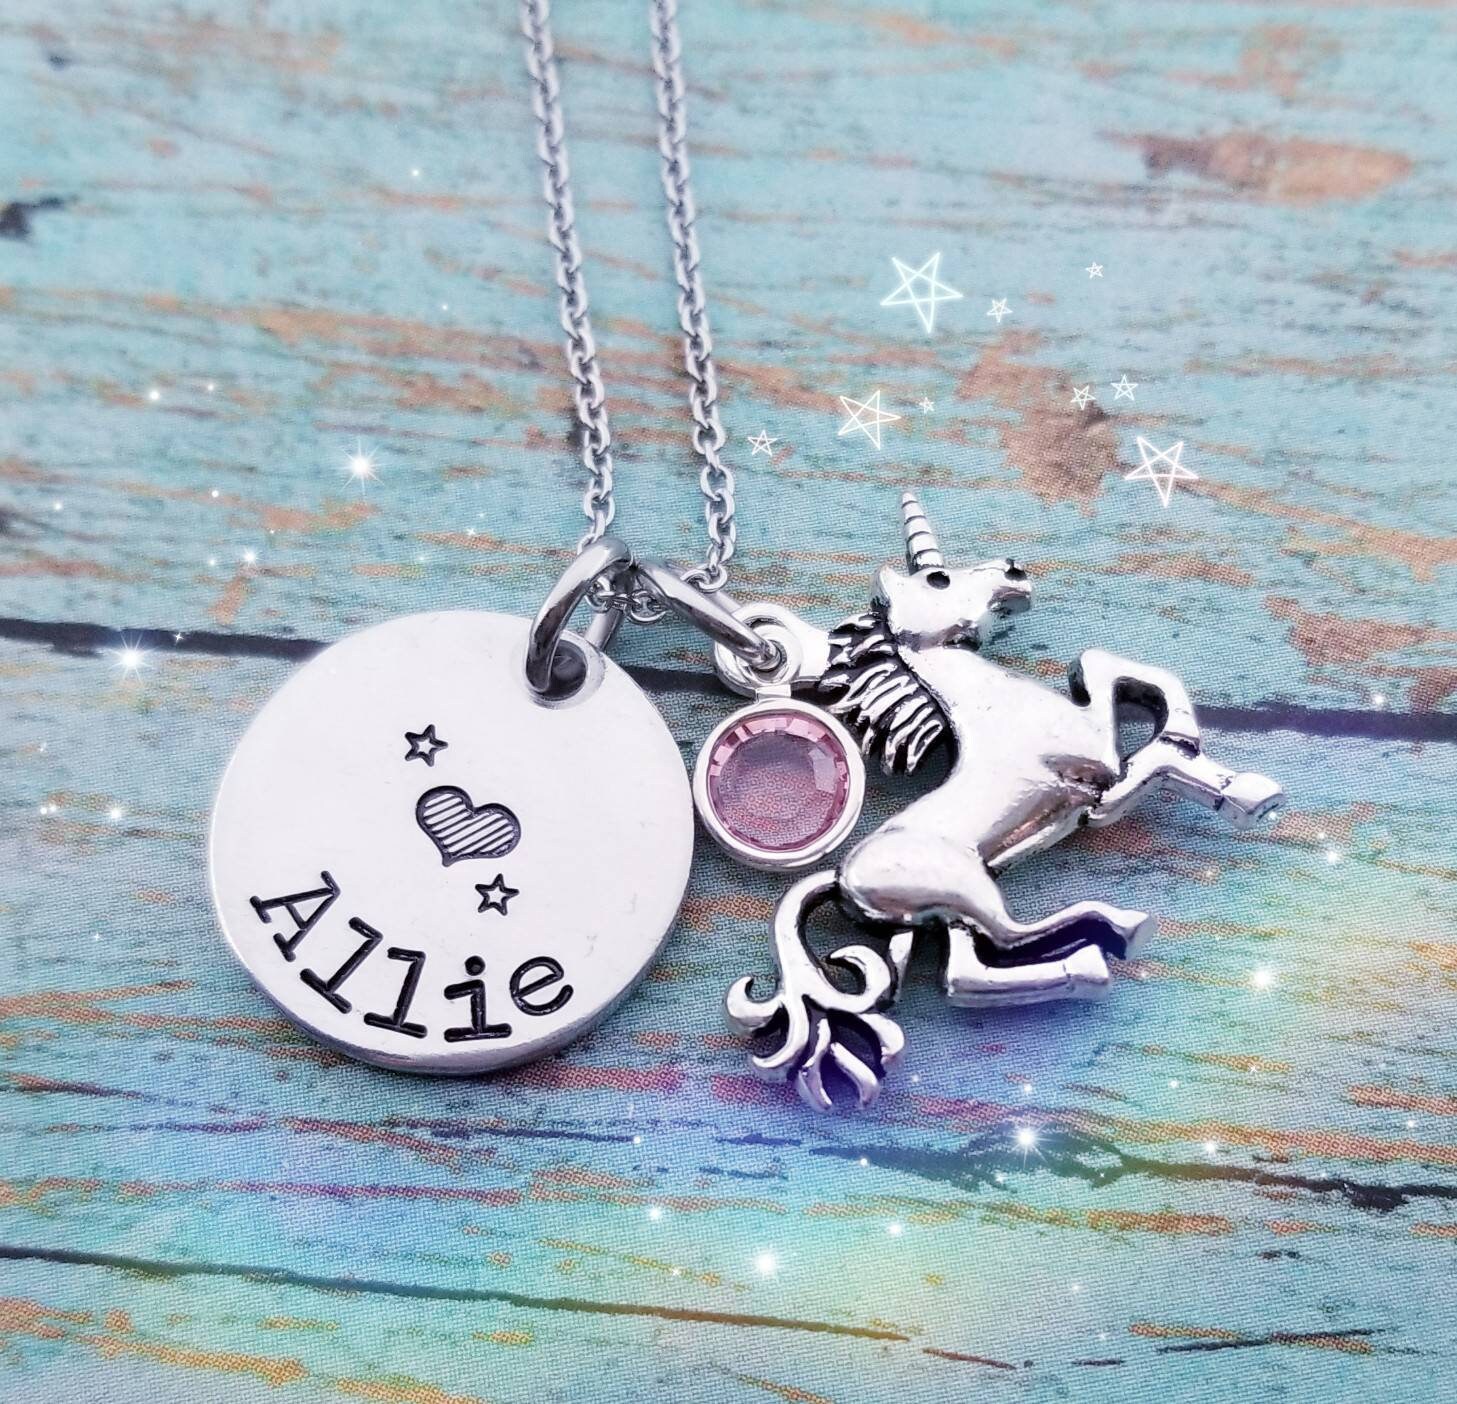 Sterling Silver Unicorn Charm Necklace With Pink Czs for Little Girls,  Toddler Unicorn Jewelry, Kids Pink Unicorn Gift, Unicorn Theme Party 